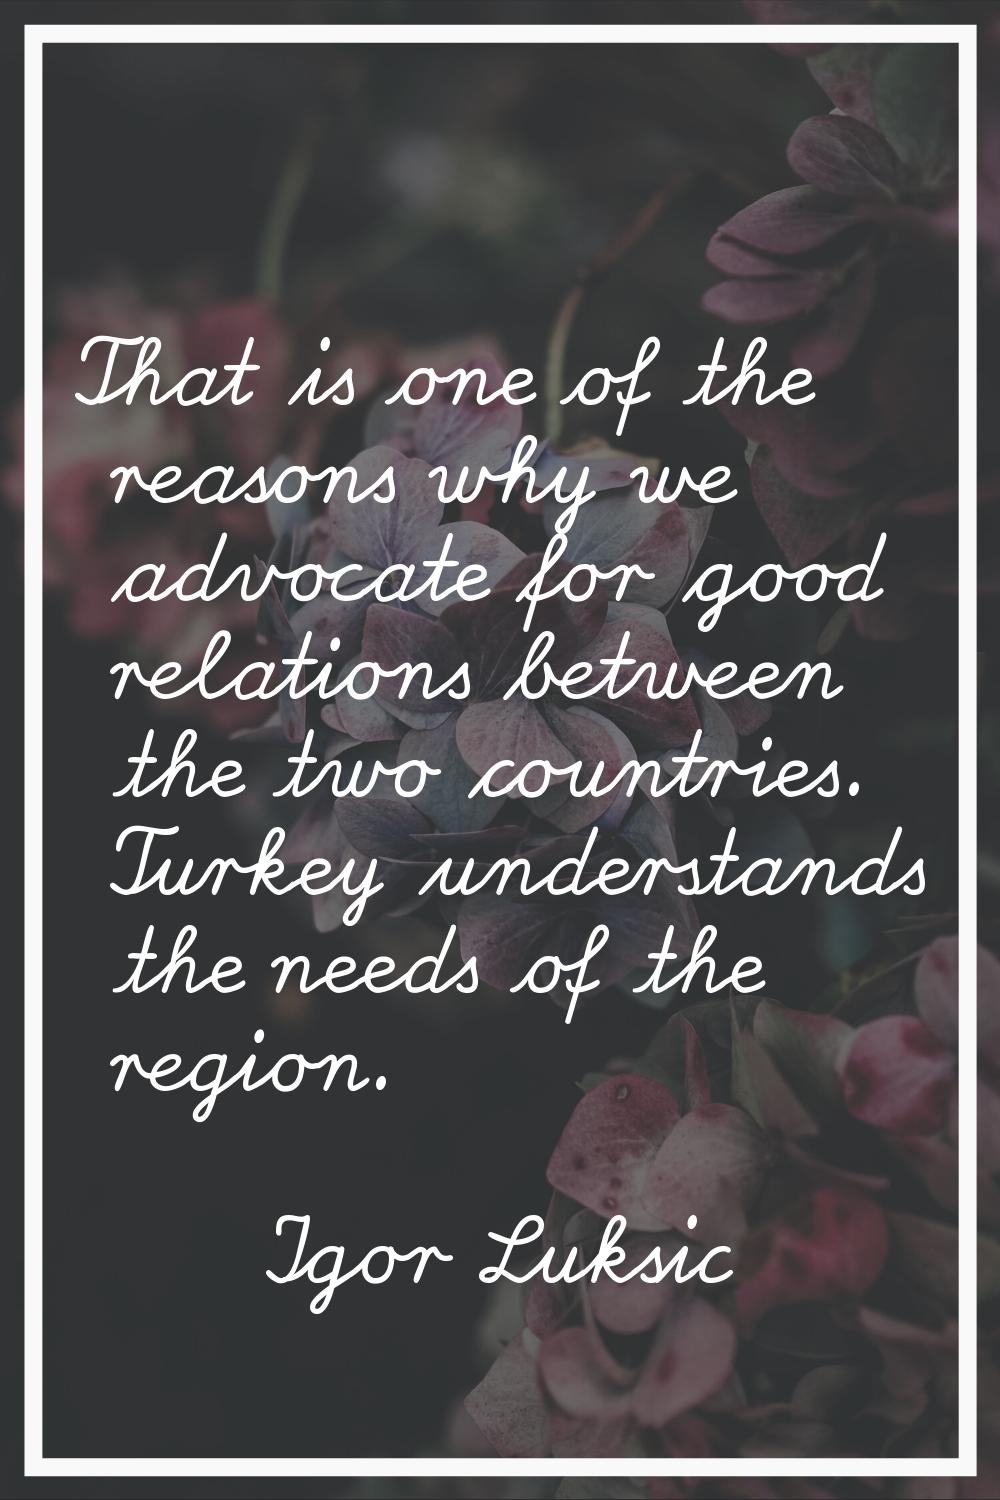 That is one of the reasons why we advocate for good relations between the two countries. Turkey und